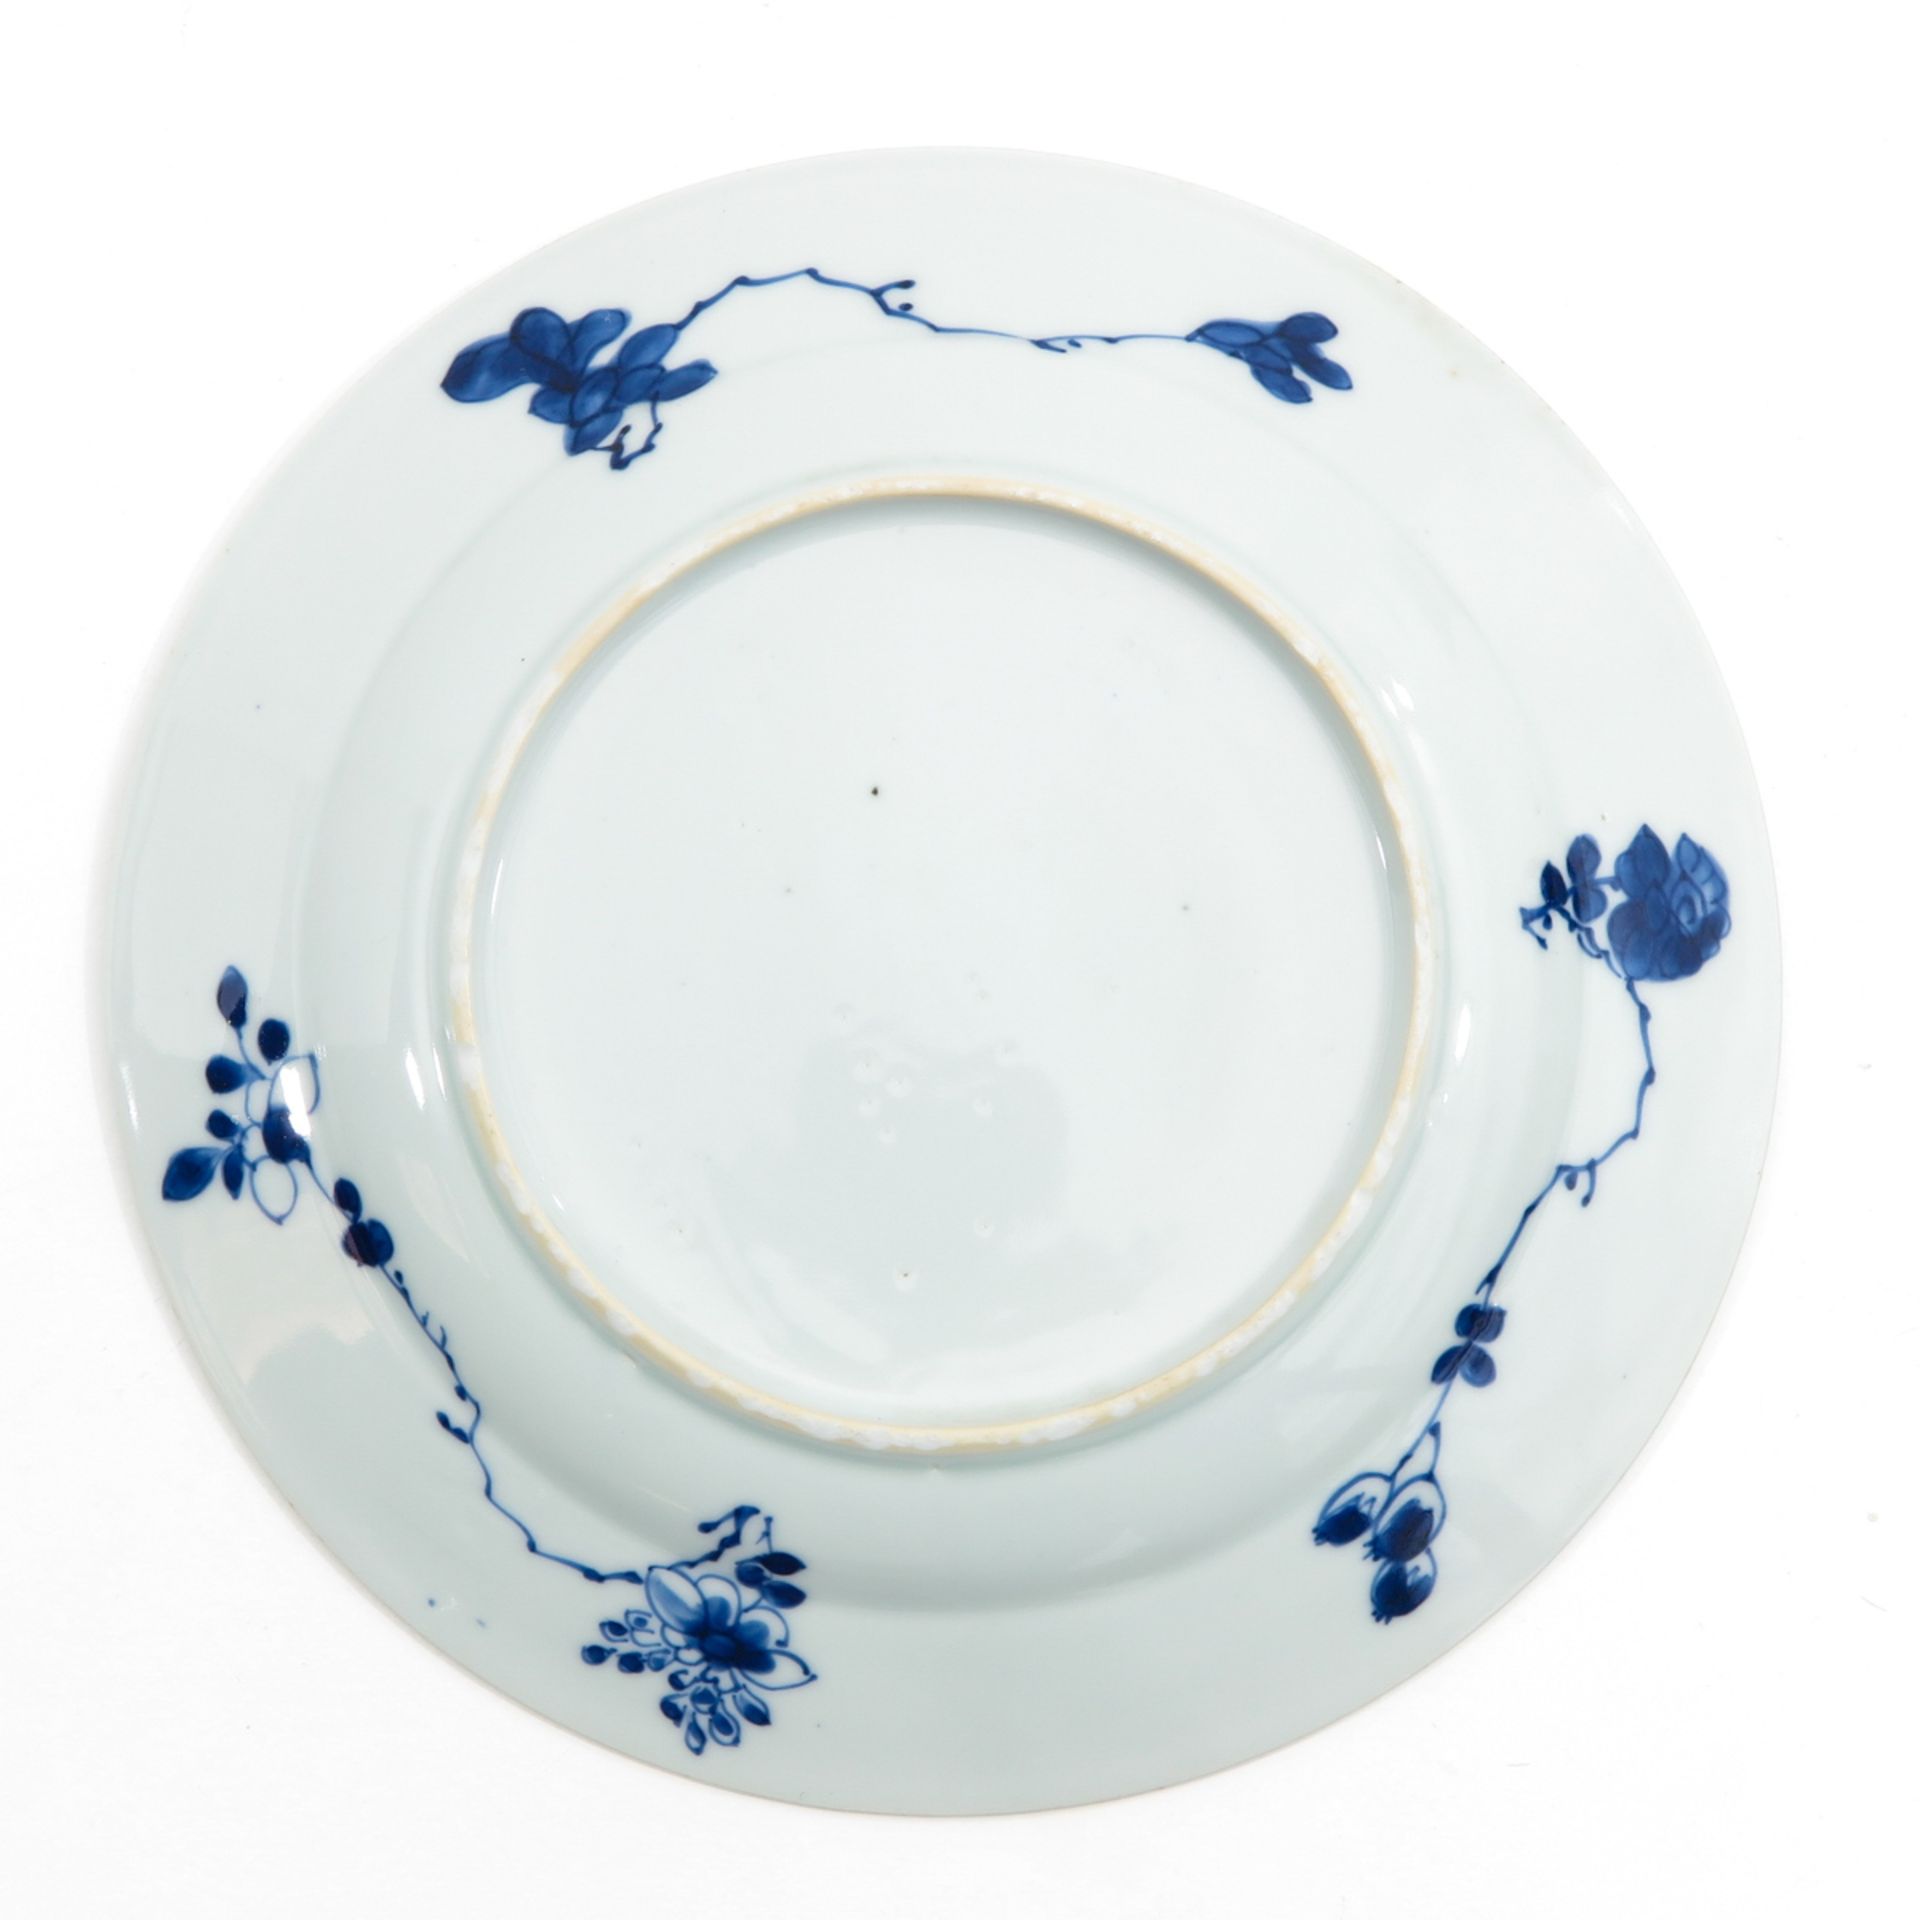 A Series of 3 Blue and White Plates - Image 6 of 10